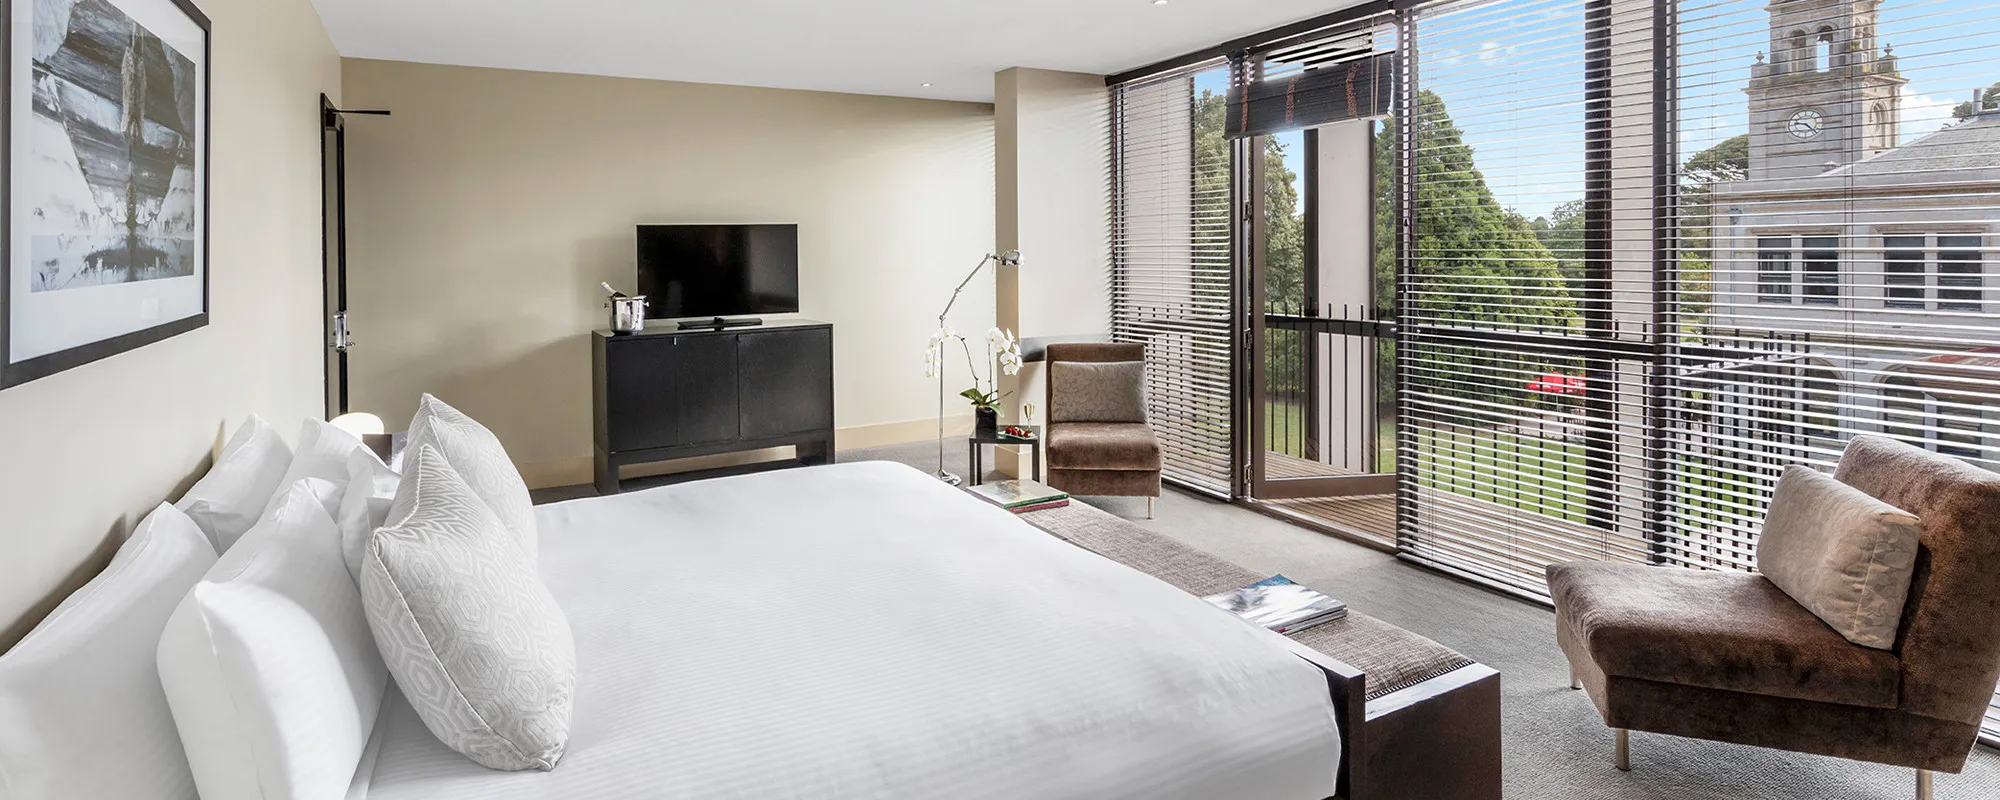 Lancemore Mansion Hotel Werribee Park Boutique Luxury Accommodation Two Bedroom 2000 x 800 2 v2